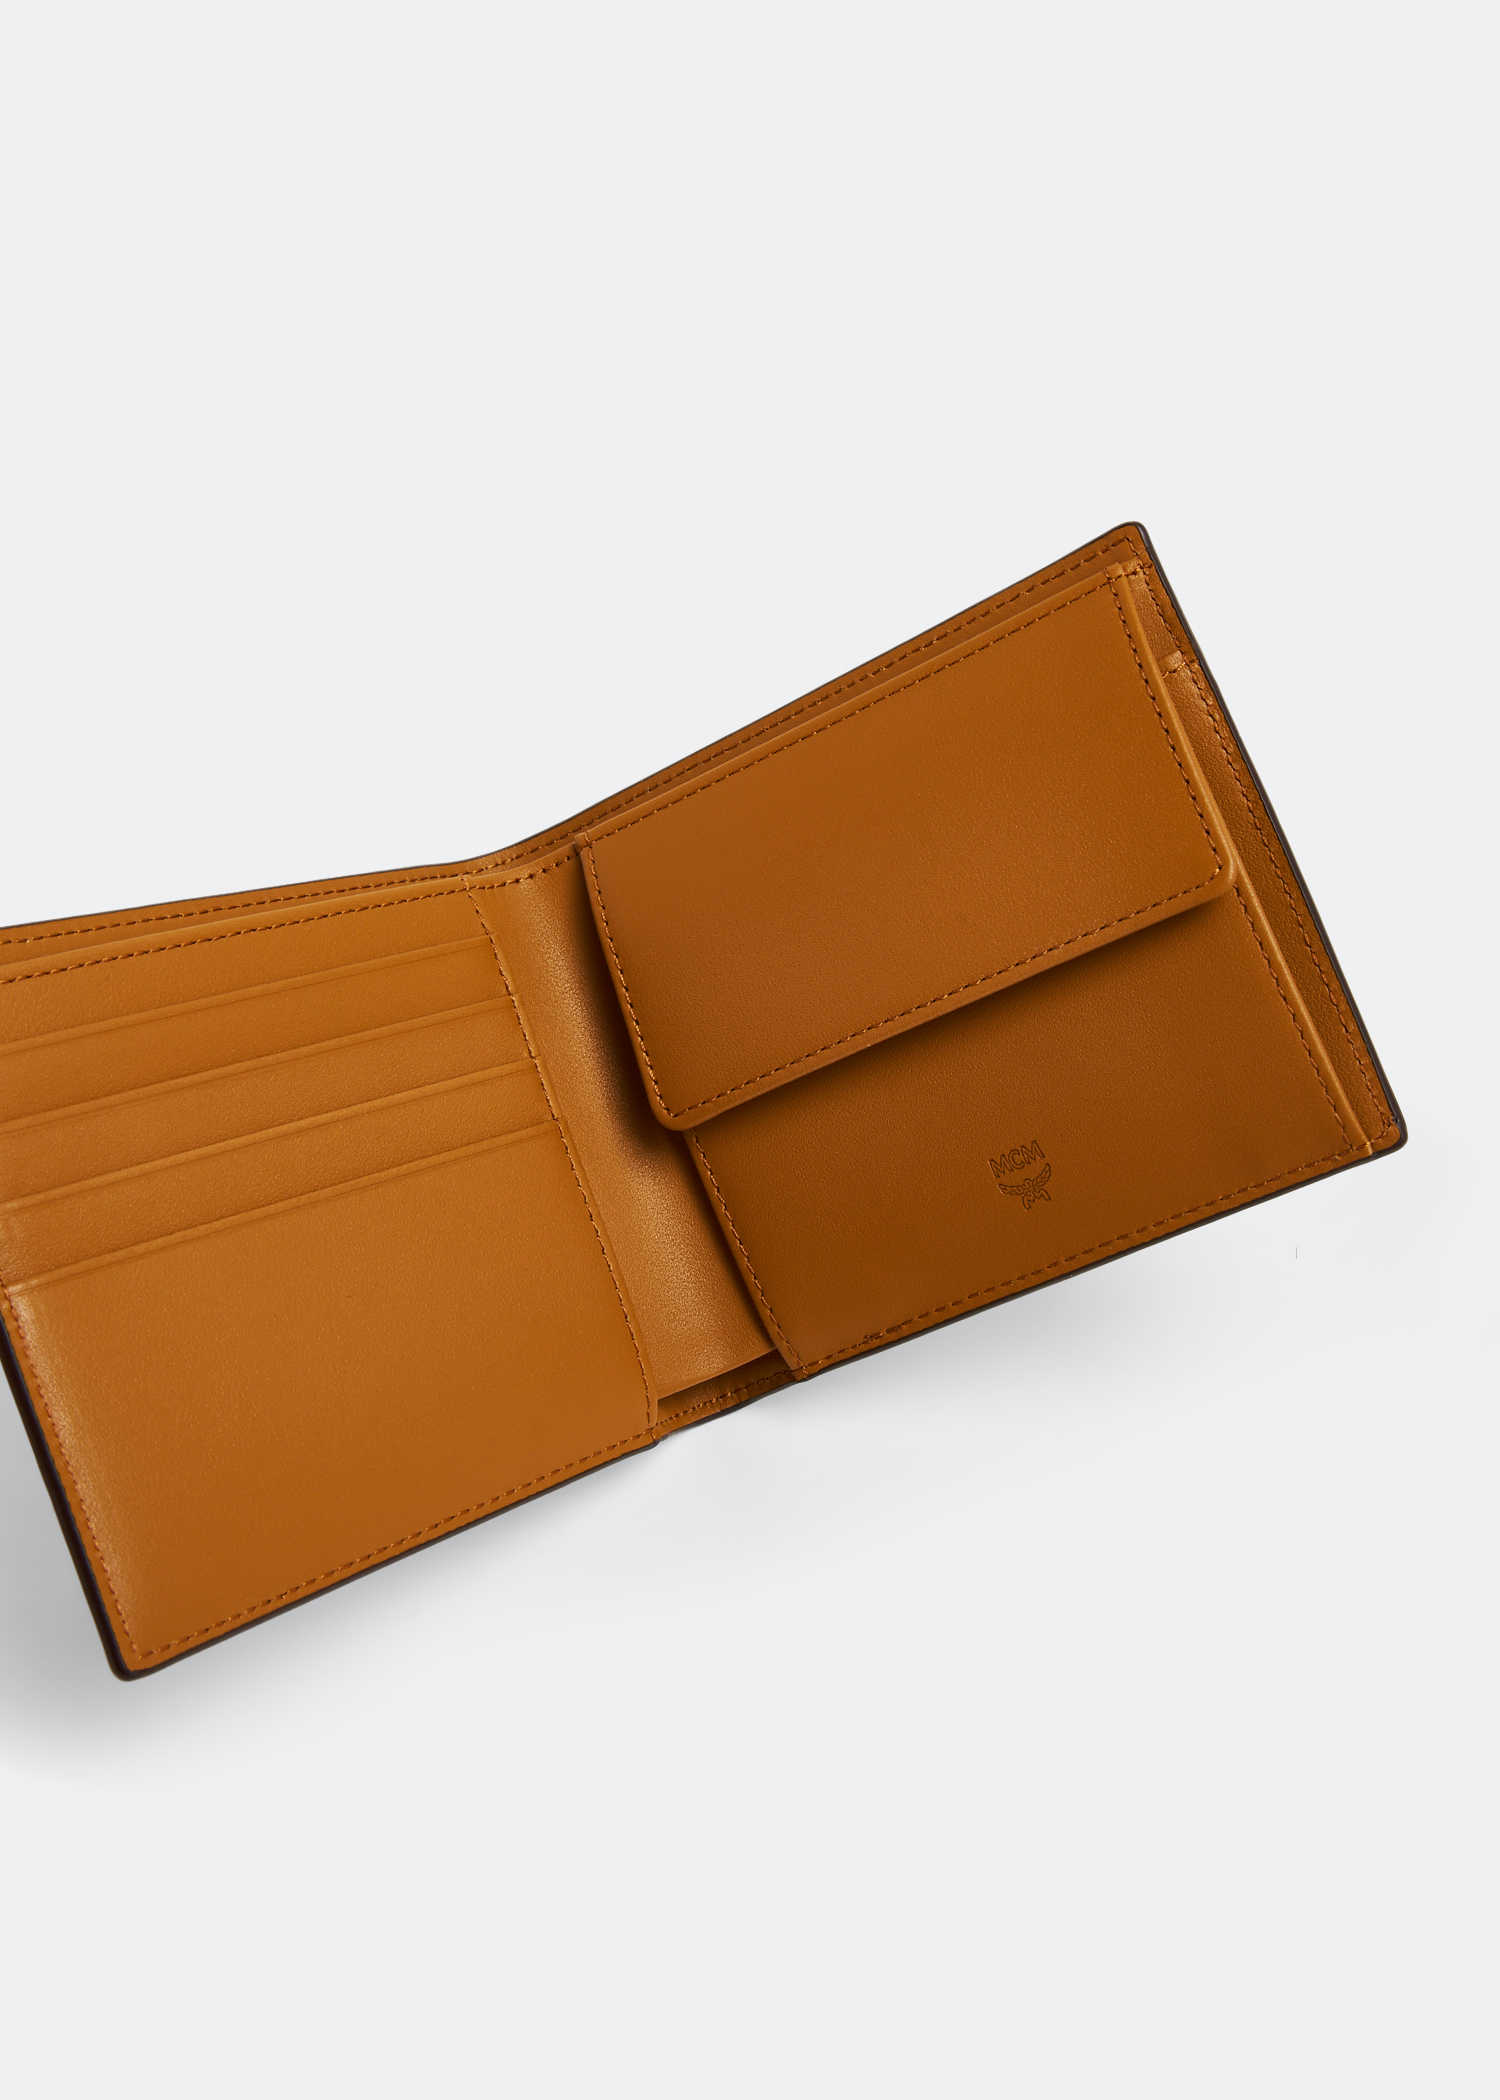 Mcm Claus Bifold Wallet for Women